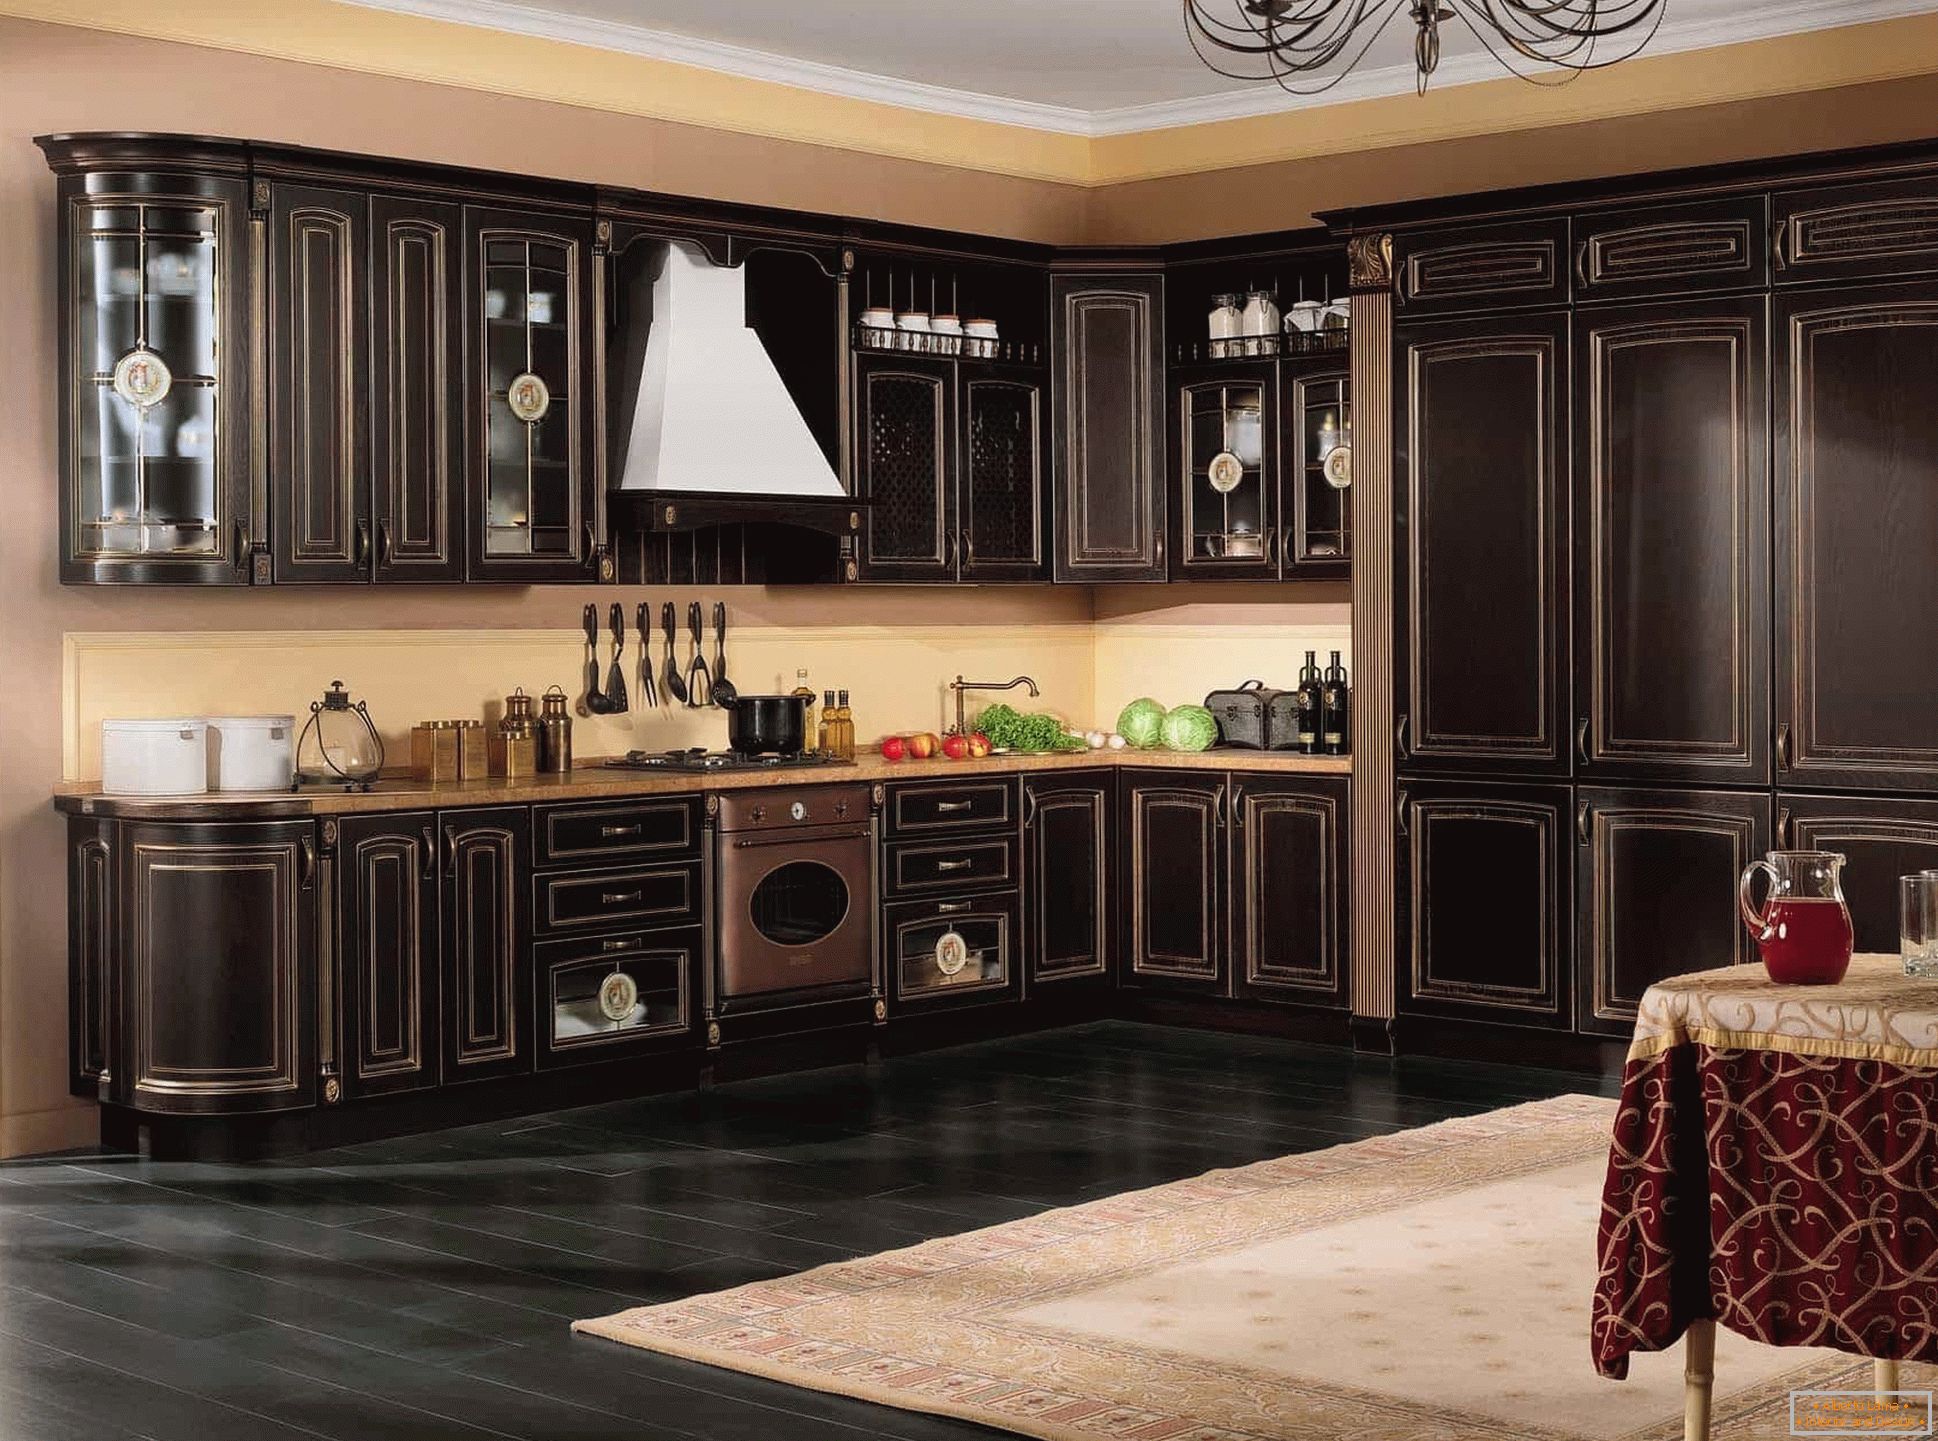 Large classical kitchen in wenge color